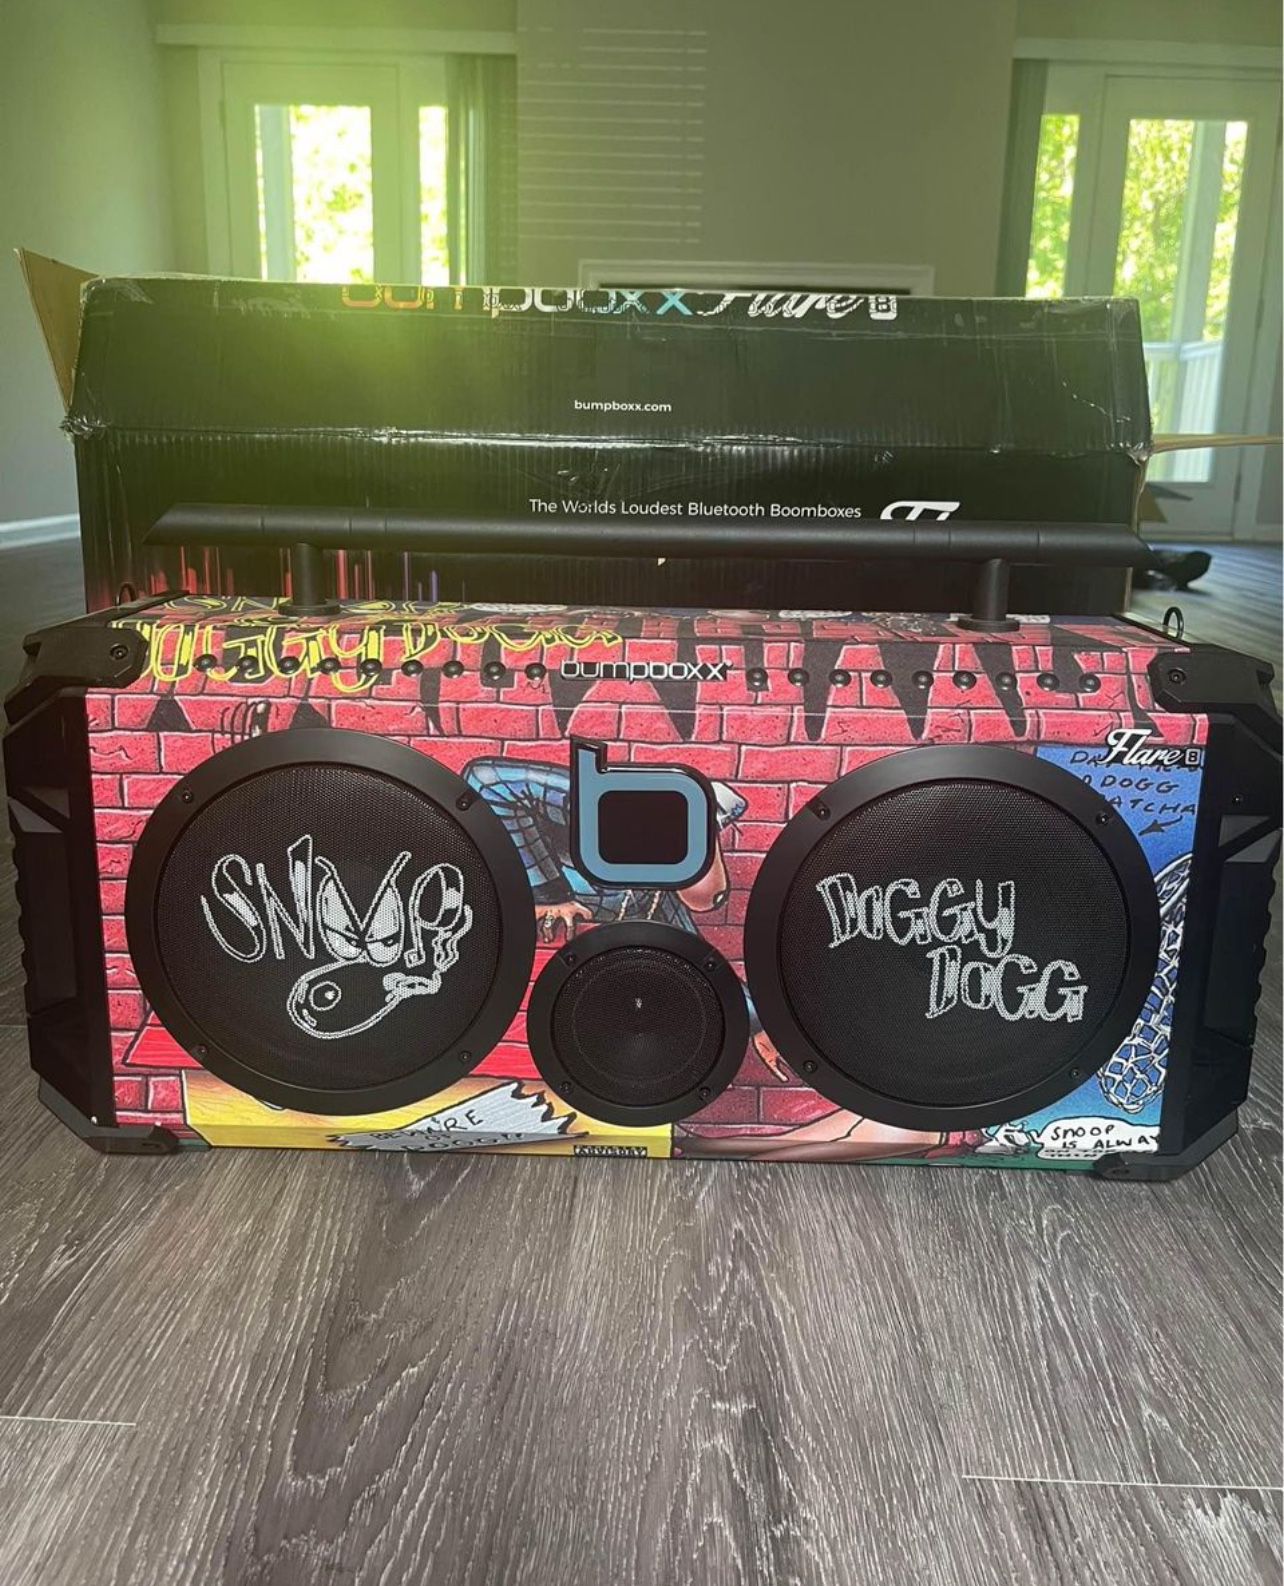 Limited Edition Doggystyle Bumpboxx Flare 8 Bluetooth Boombox